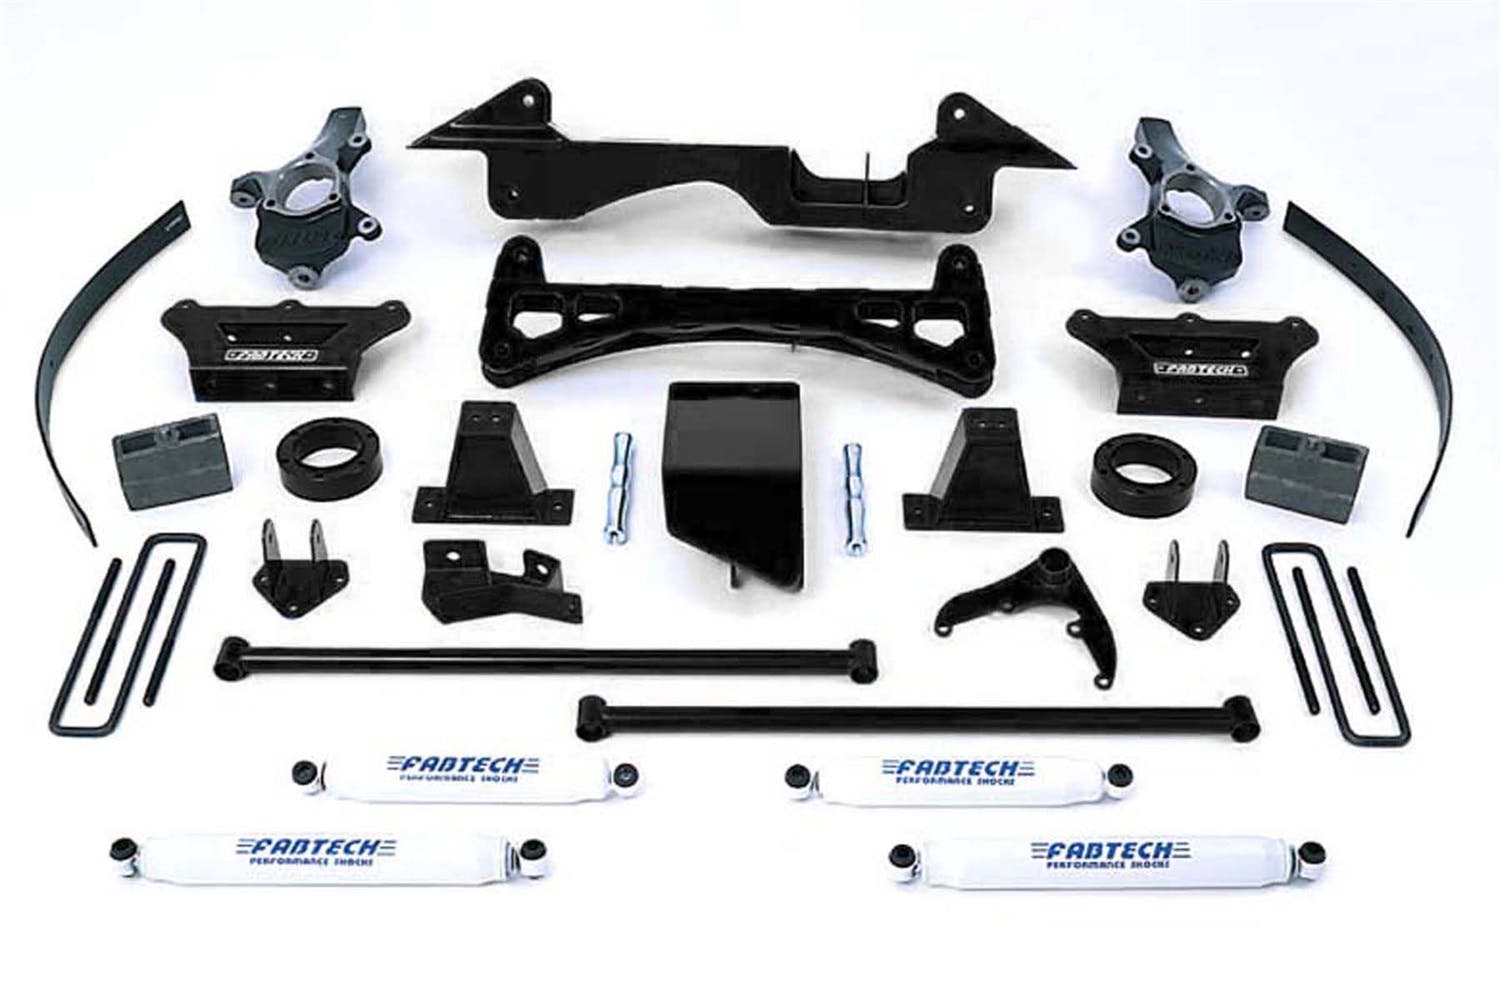 Fabtech K1005 6in. PERF SYS W/PERF SHKS 88-98 GM K1500 PU 4WD/92-99 SUB/2DR BLZR/4DR TAHOE 4WD